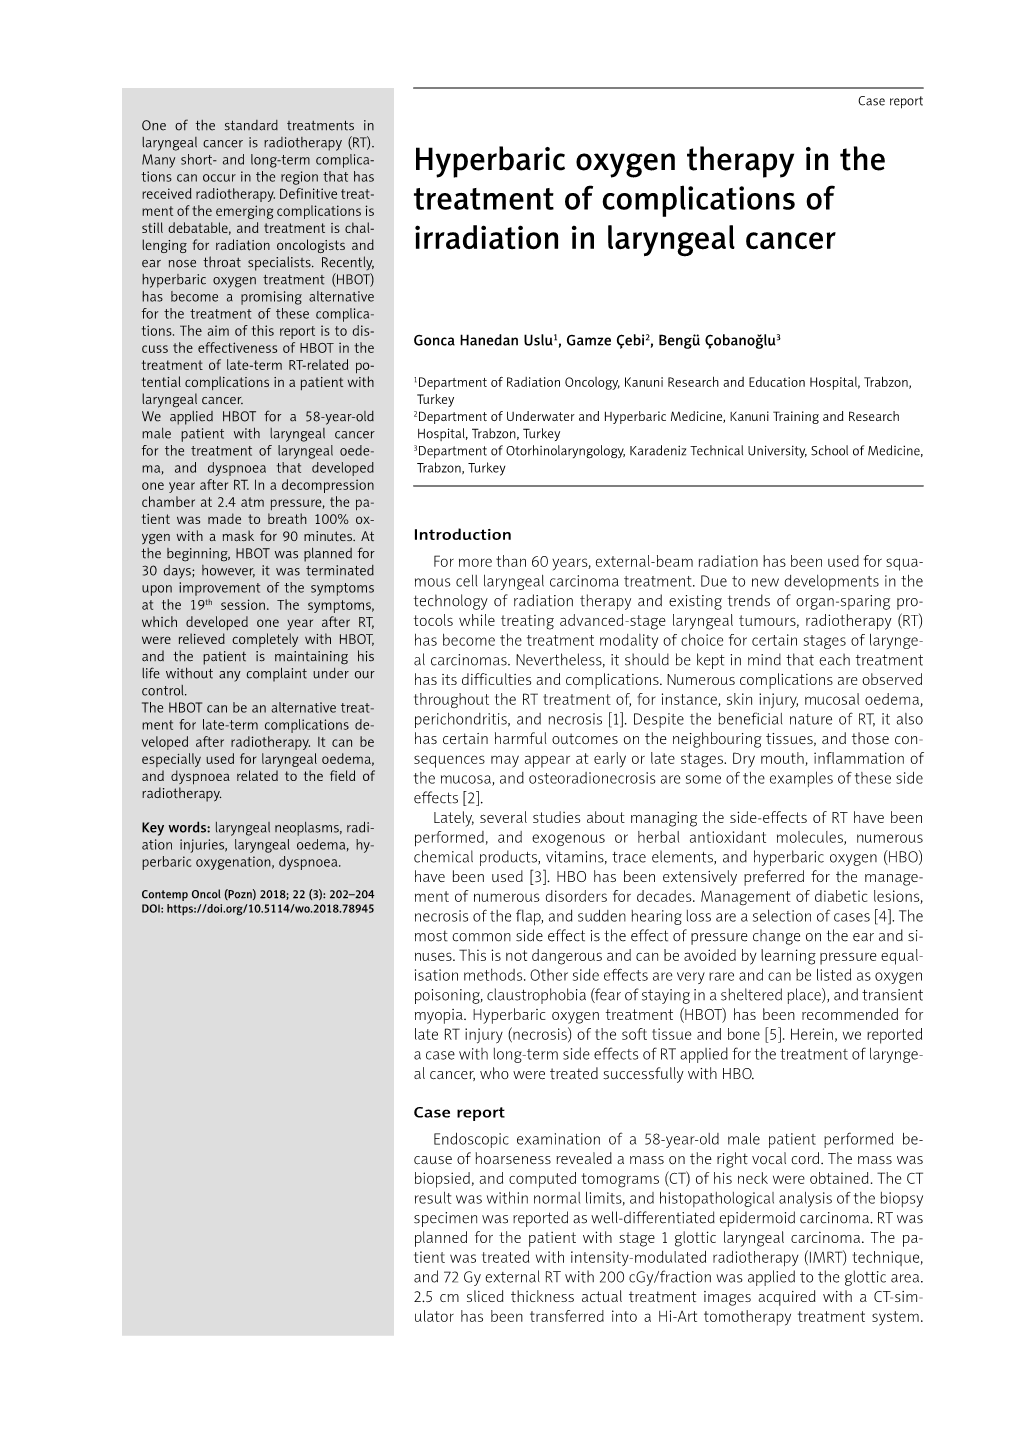 Hyperbaric Oxygen Therapy in the Treatment of Complications of Irradiation in Laryngeal Cancer 203